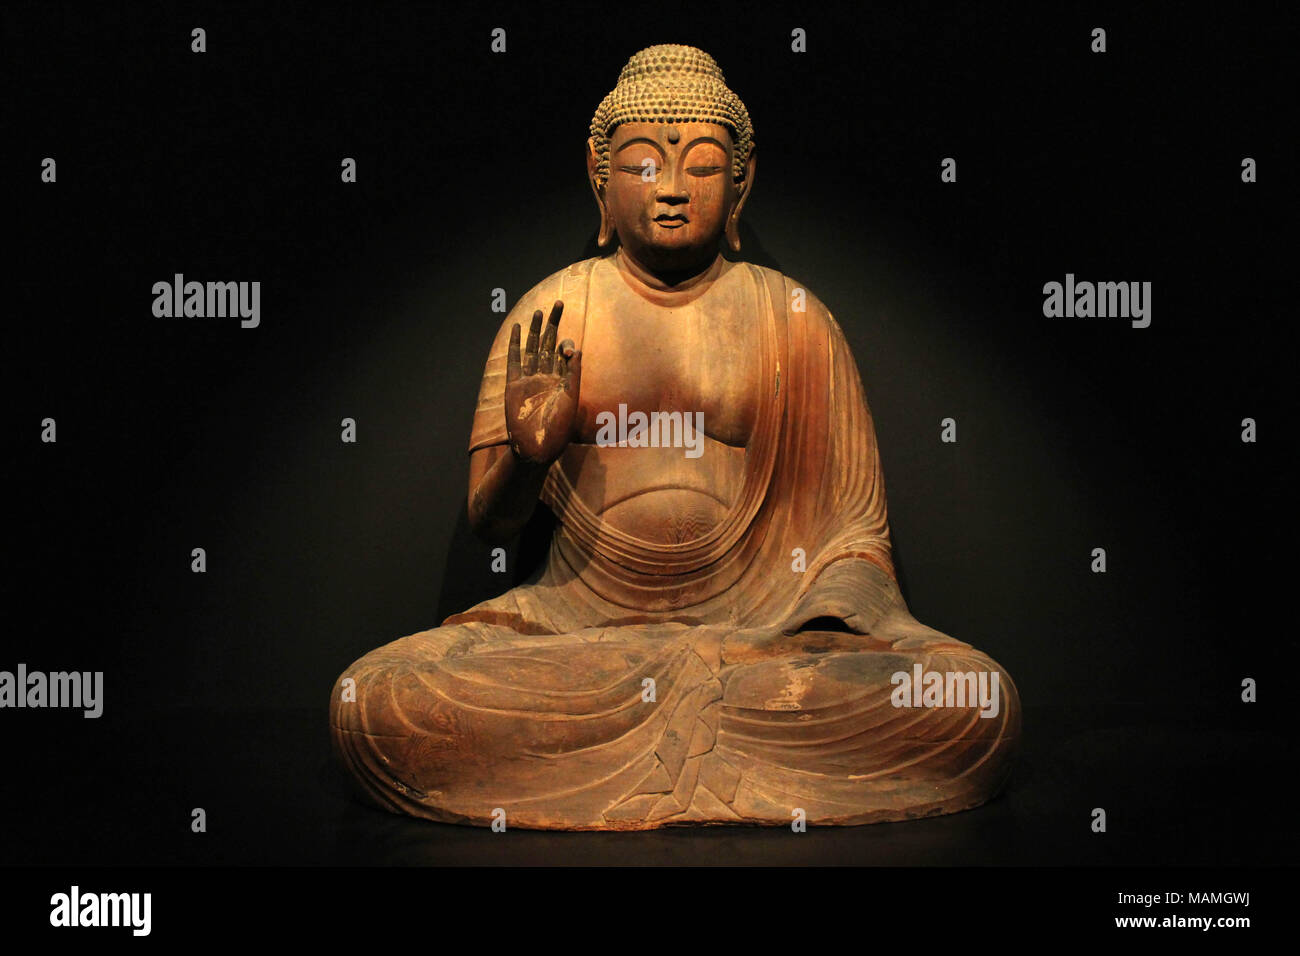 Buddha statues exhibited at Tokyo National Museum. The collectionss are impressive. Taken in Tokyo, February 2018. Stock Photo